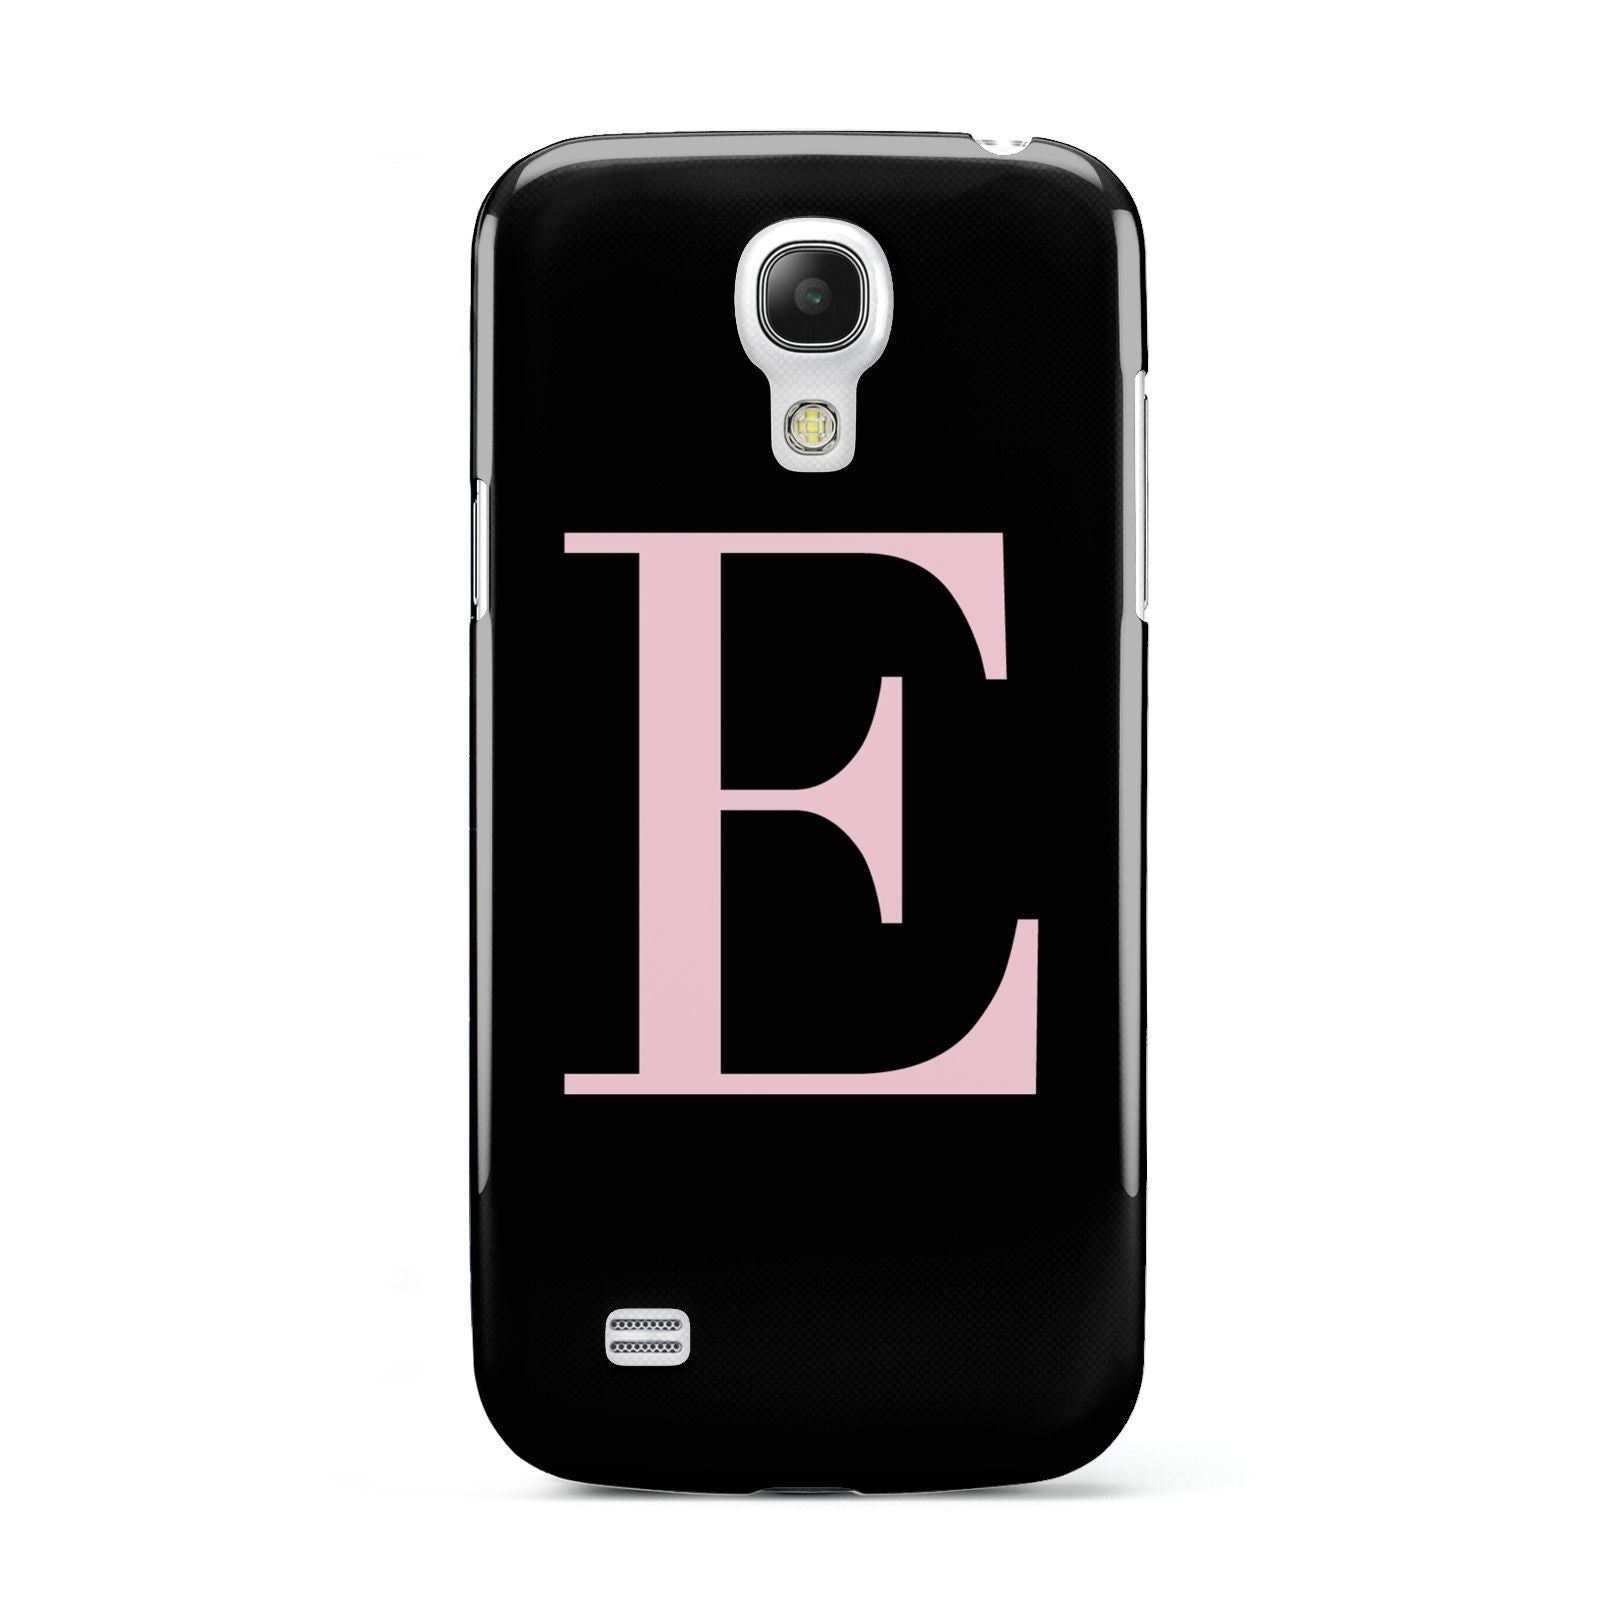 Black with Pink Personalised Monogram Samsung Galaxy S4 Mini Case